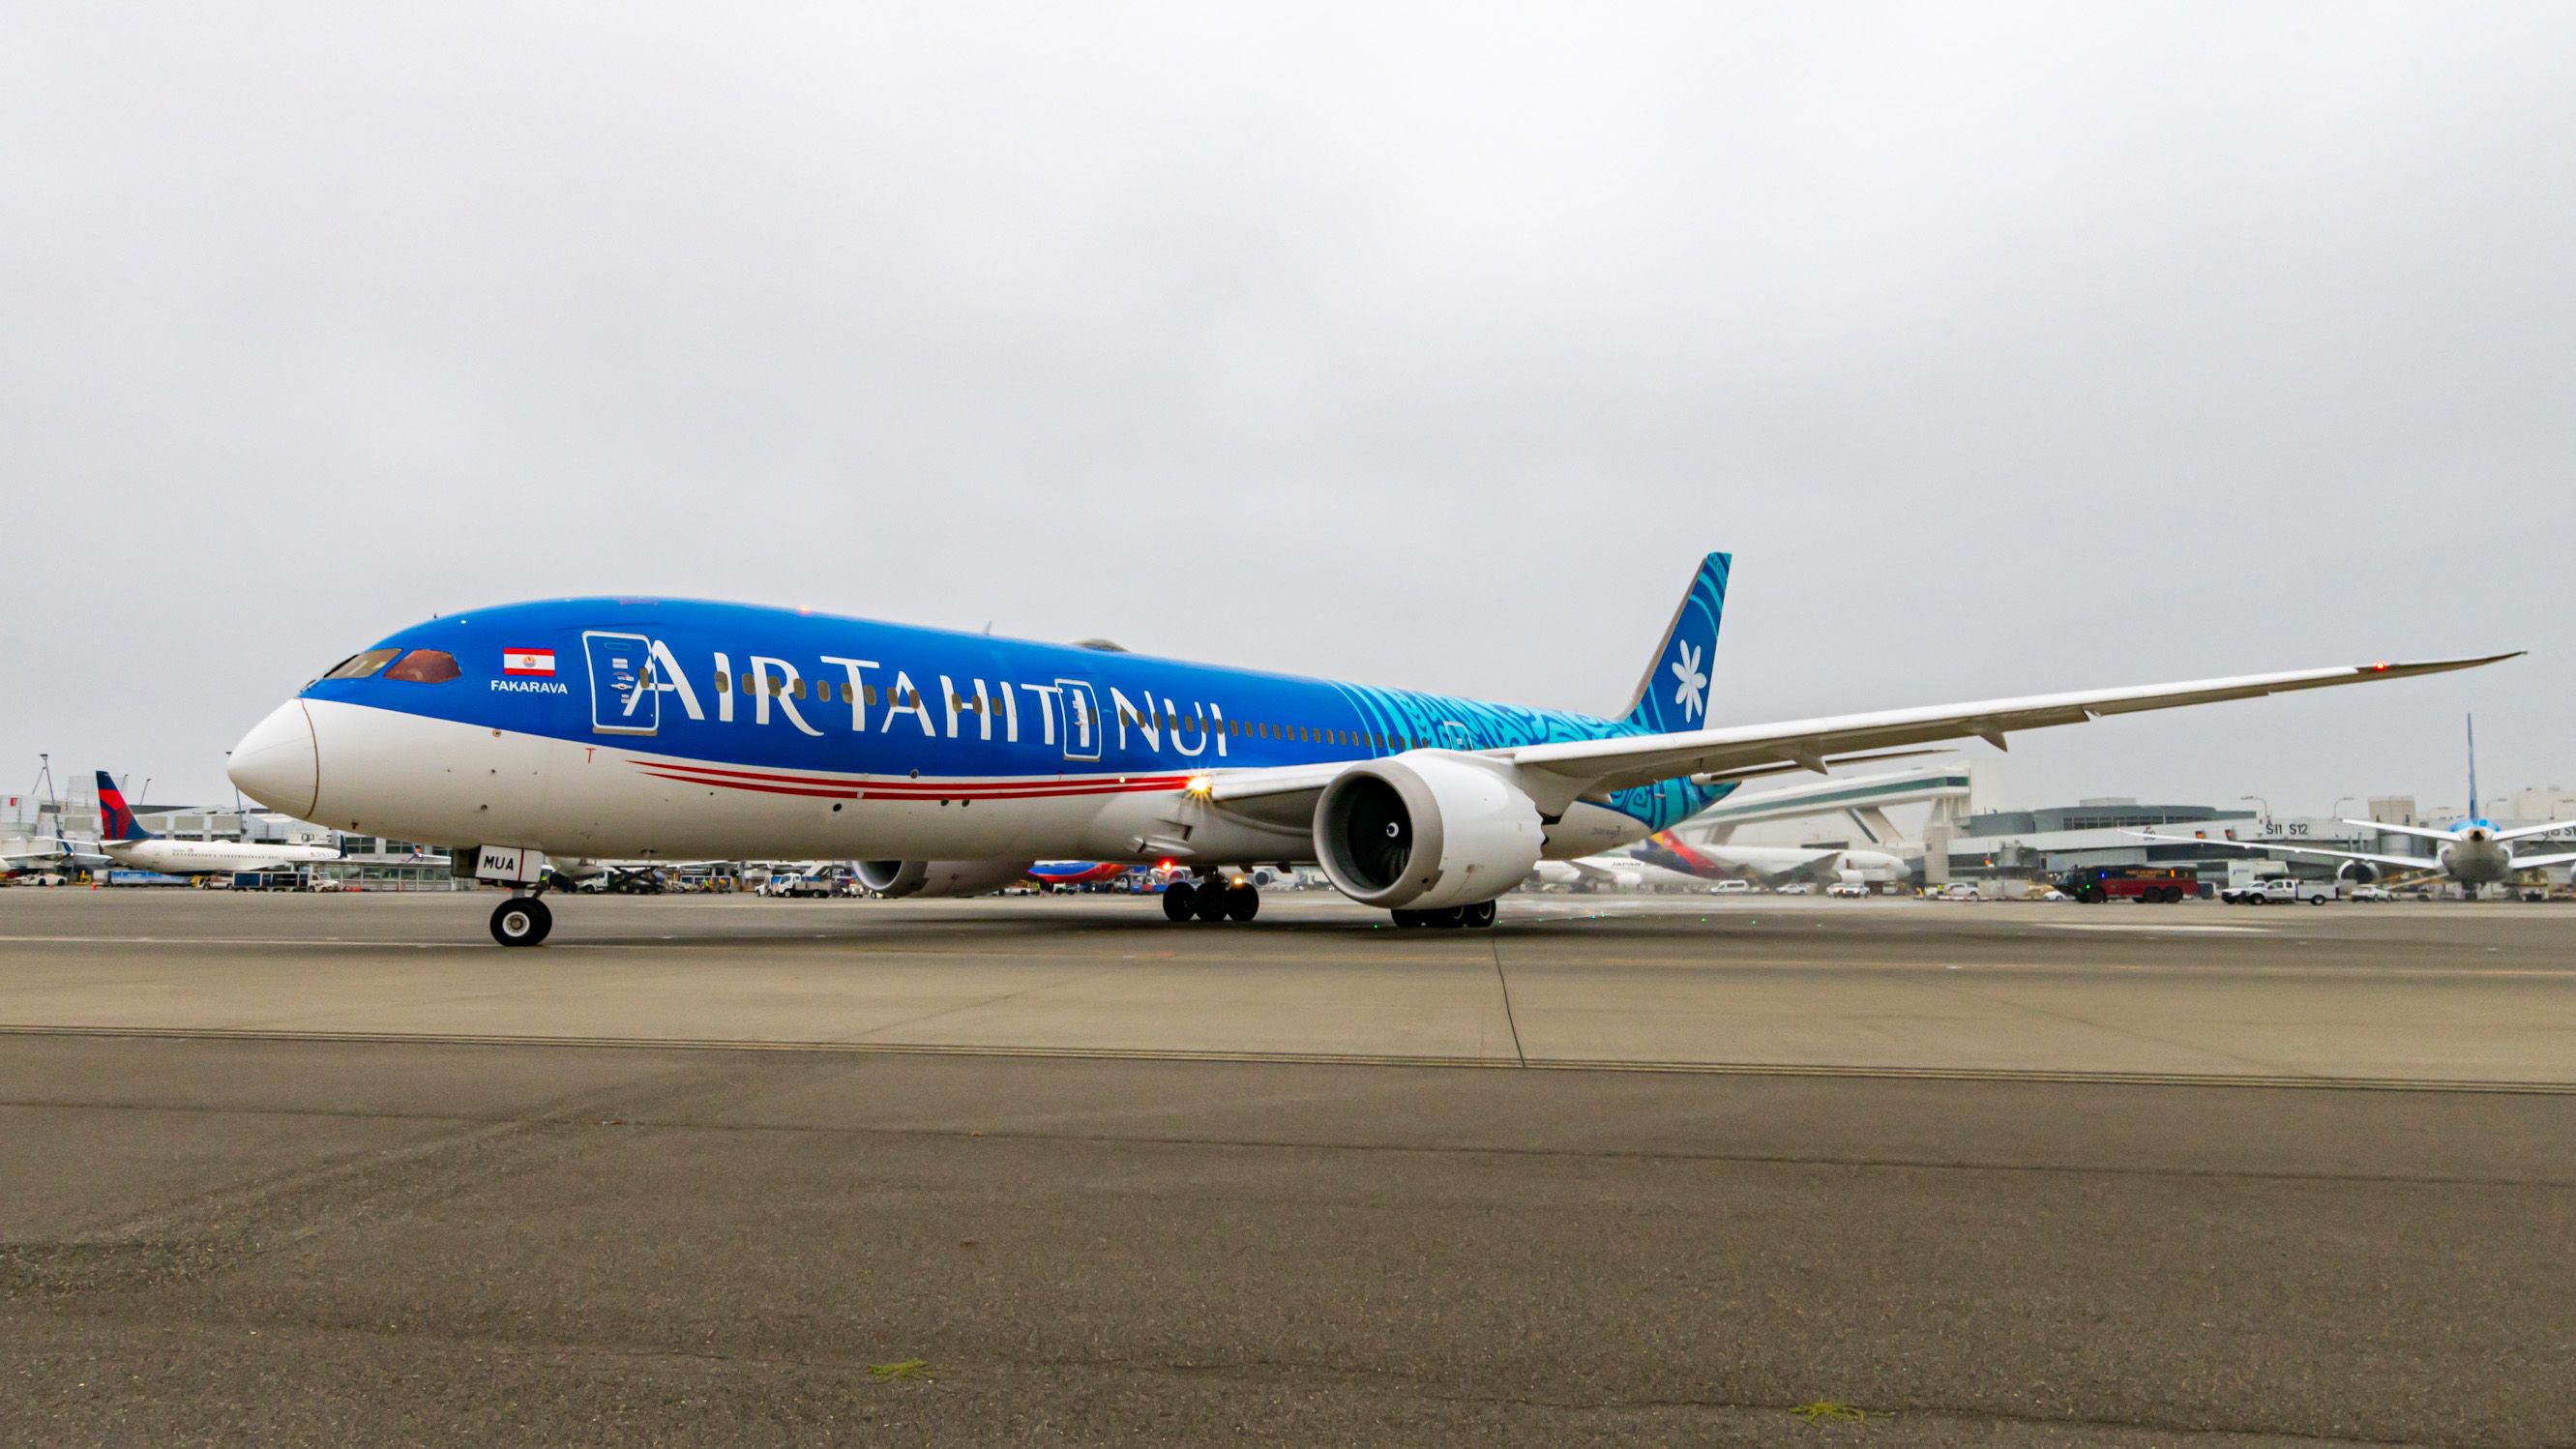 FAKARAVA Turning Onto the Taxiway, Beacons Ablaze - A Boeing 787-9 of Air Tahiti Nui leaving SeaTac